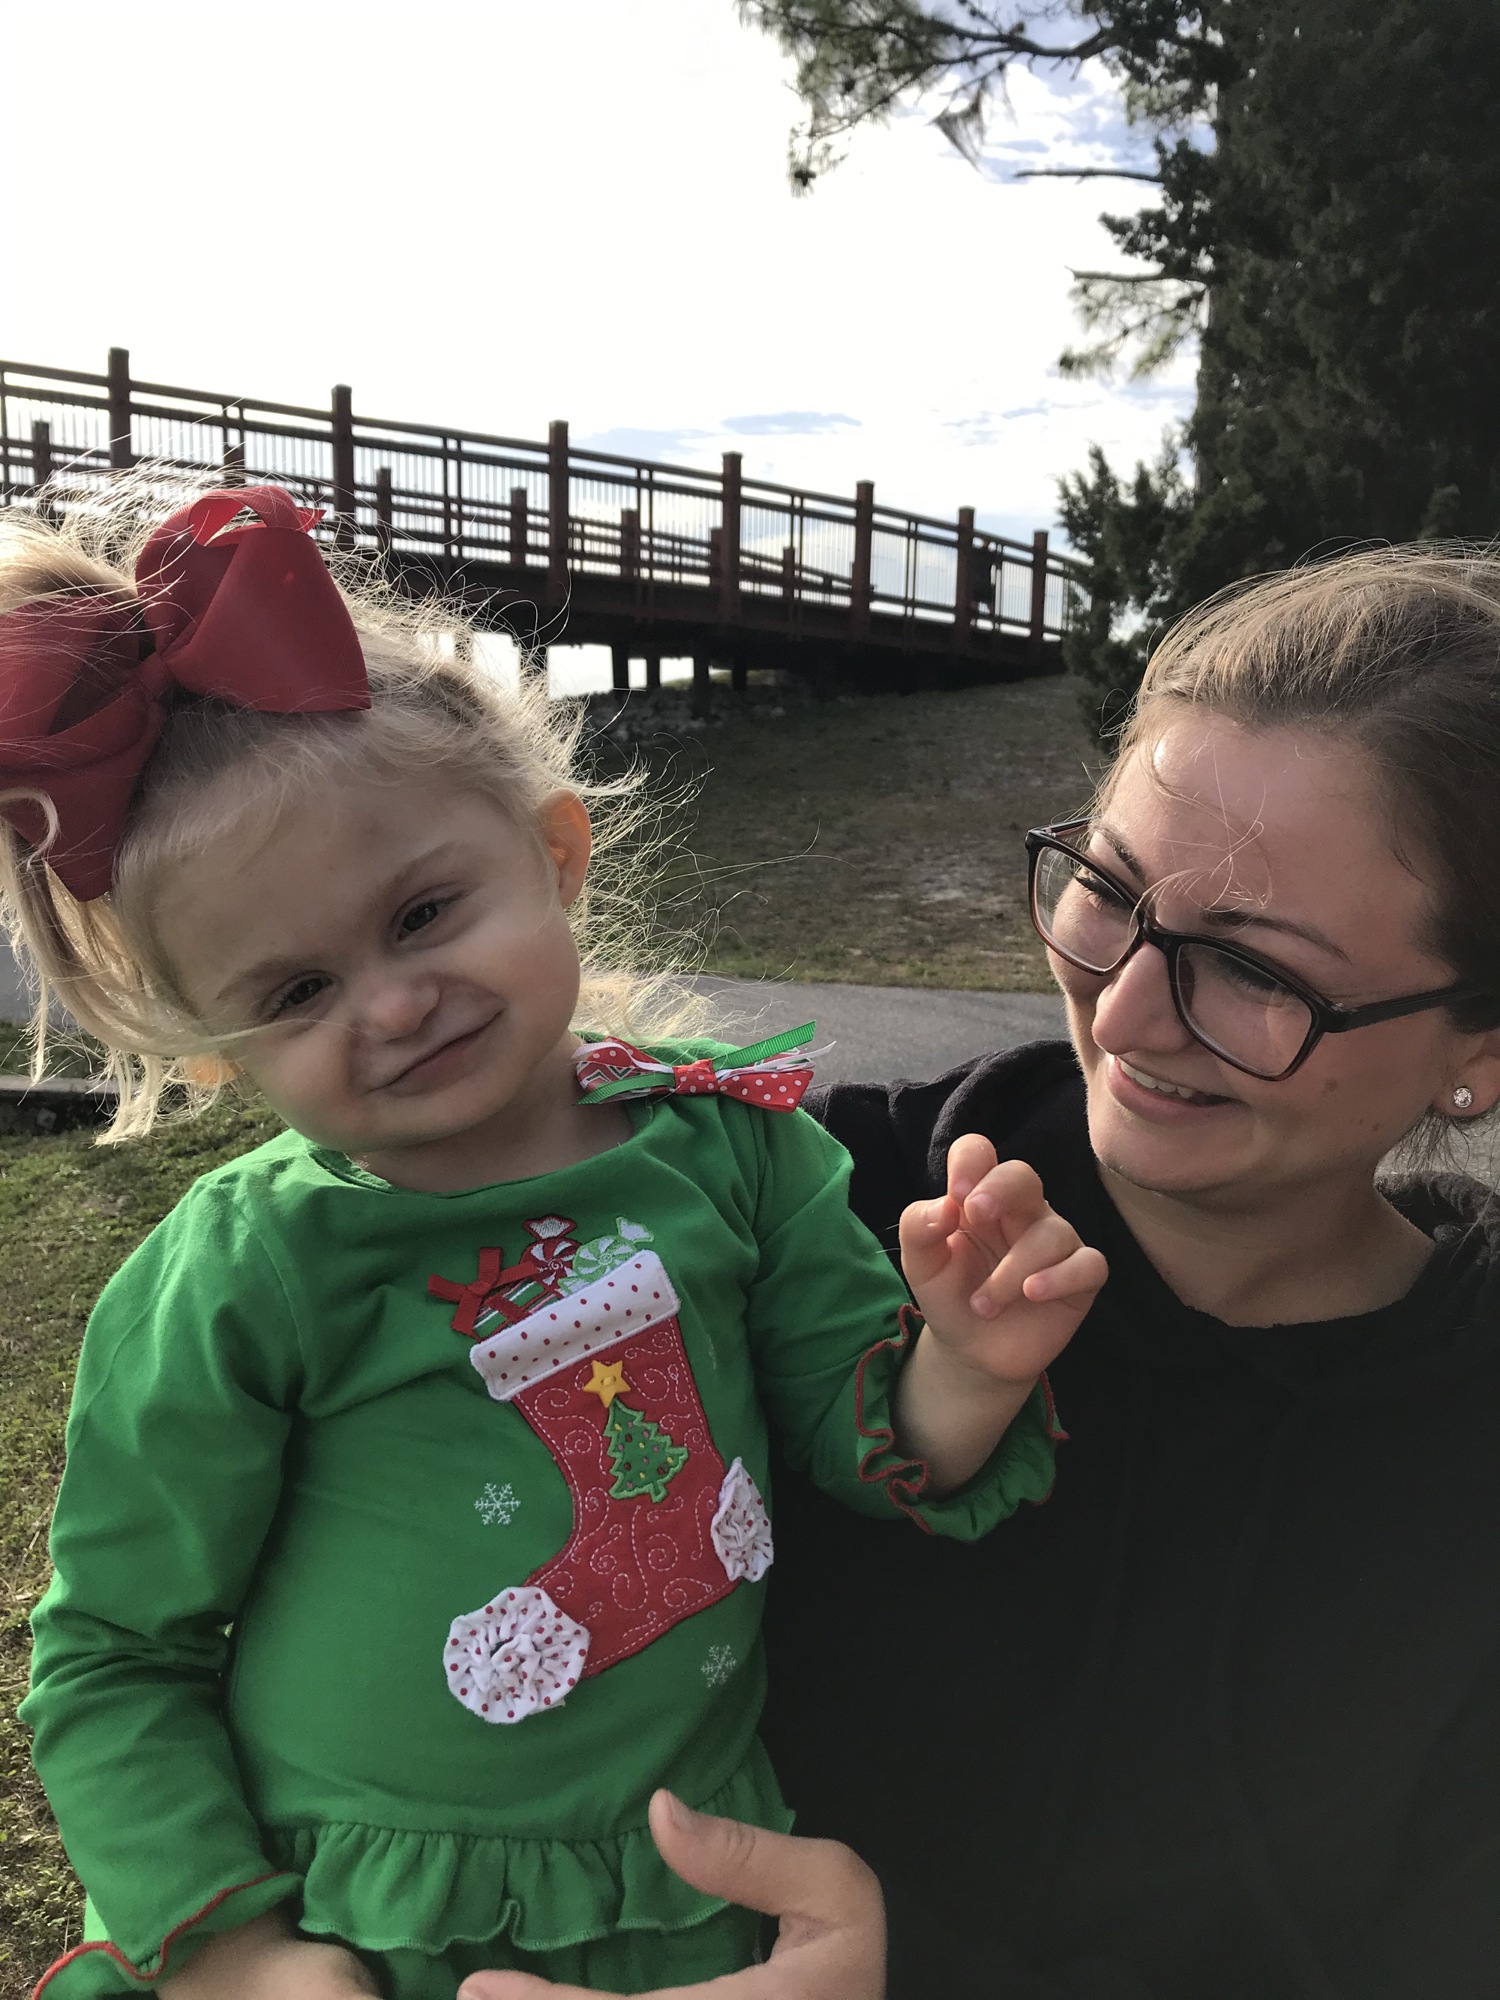 Katrina Michel (right) holds her daughter, Lili, on Dec. 21 at Nathan Benderson Park. Lili has CHARGE syndrome, a disorder that has her caused her to be deaf, blind in one eye and unable to walk